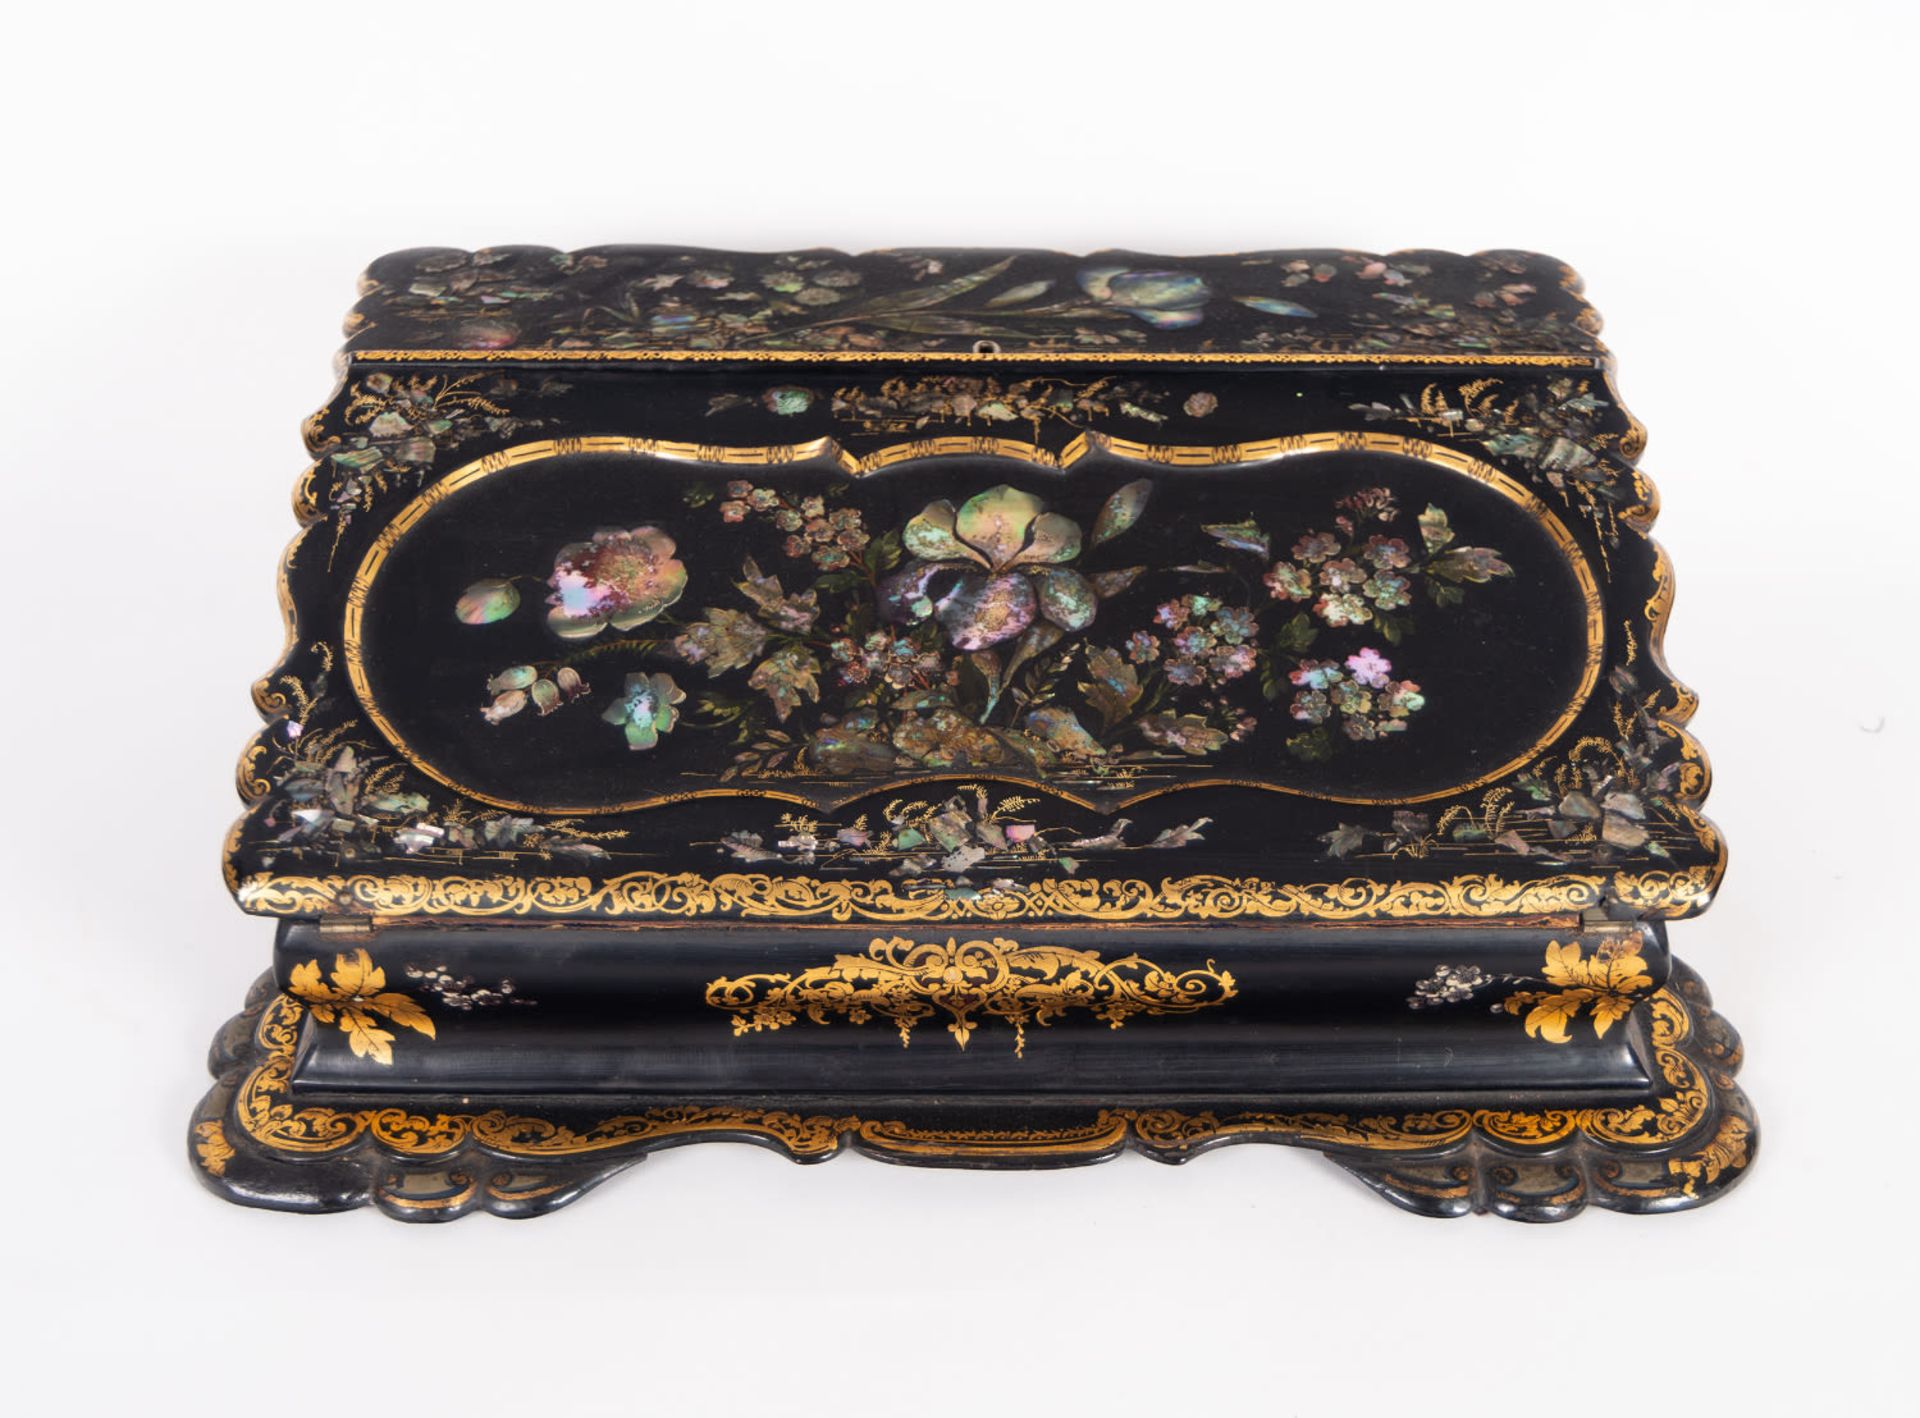 Beautiful writing desk in gilded wood with mother-of-pearl inlays, French school of the 19th century - Image 2 of 13